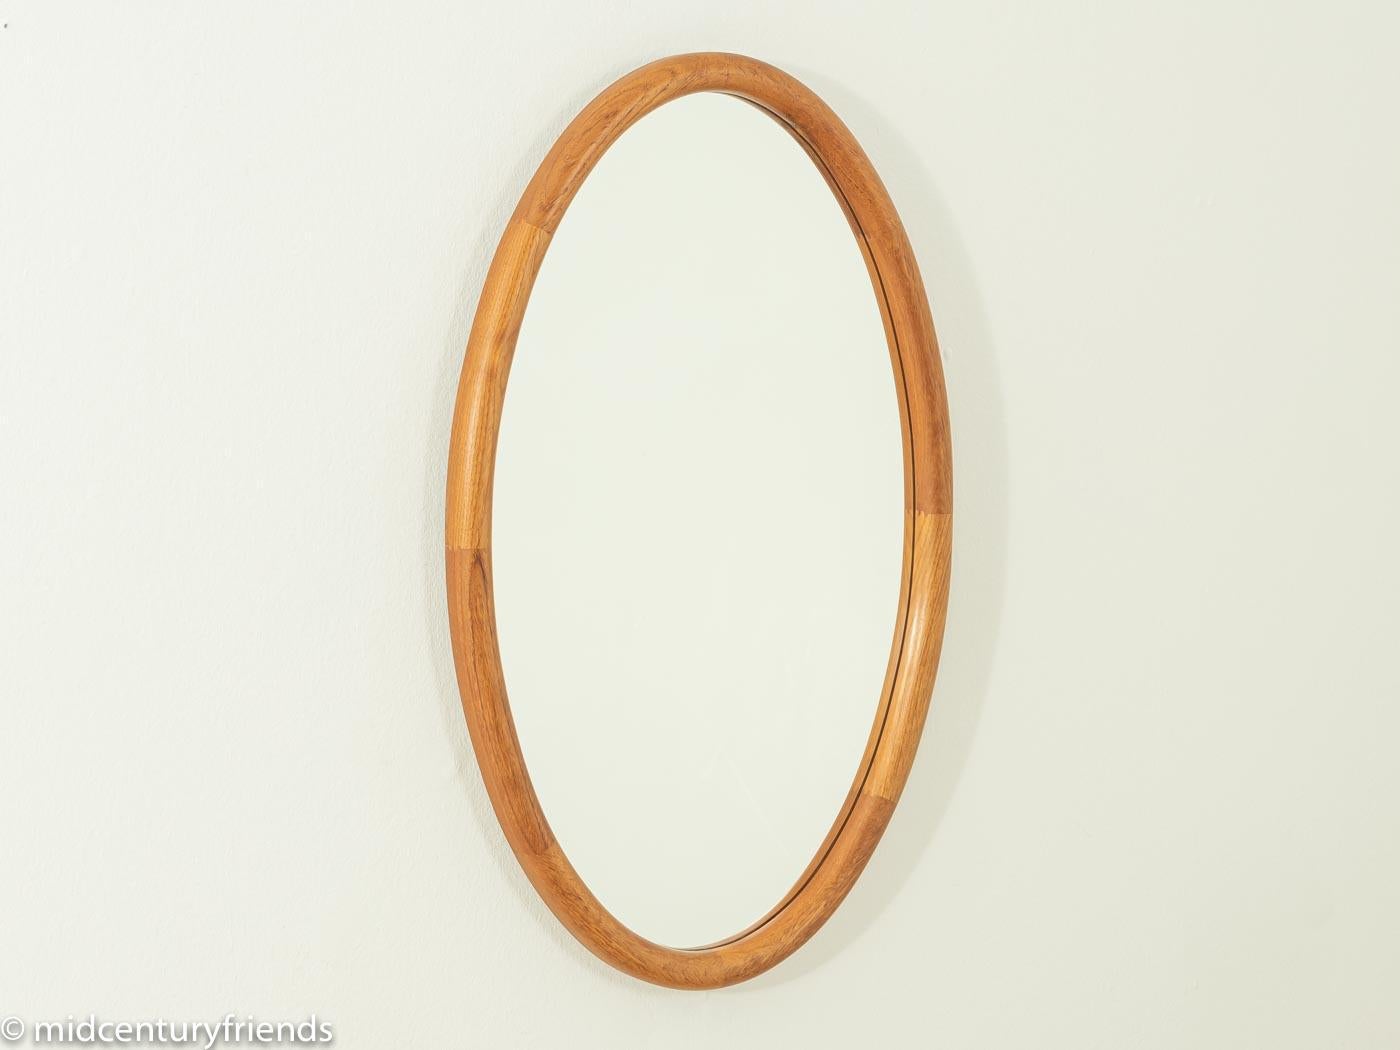 Wonderful mirror from the 1960s with a high-quality solid teak frame.